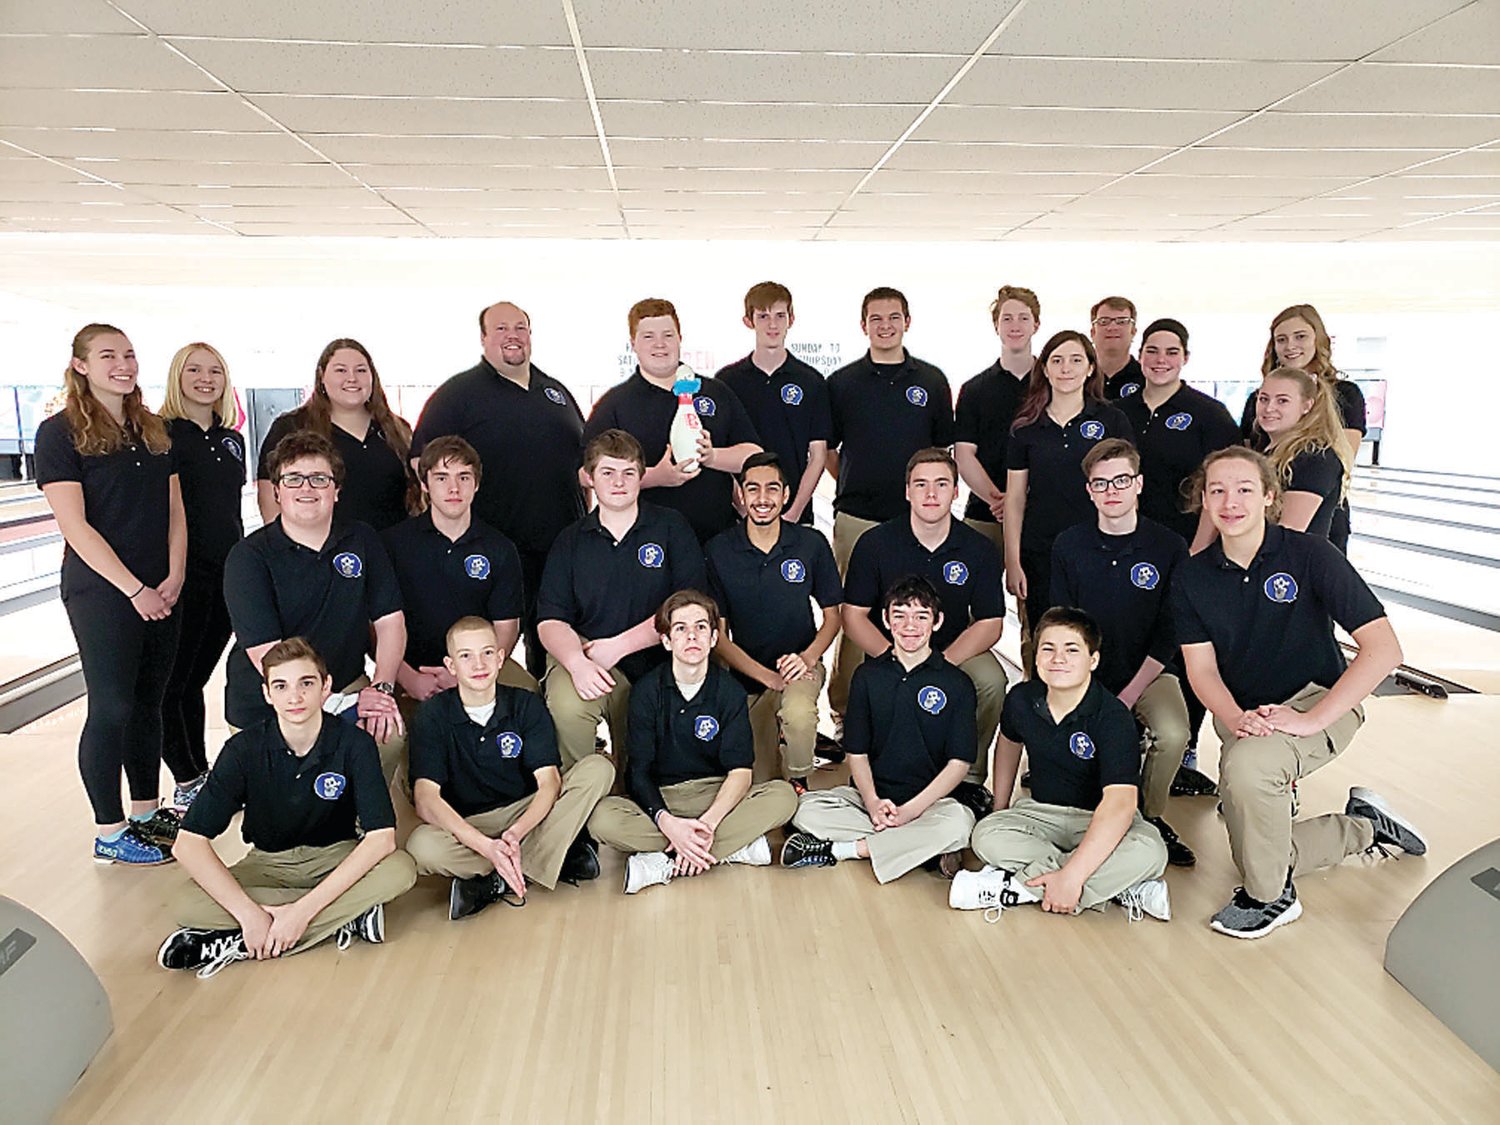 Quakertown’s bowlers pose for a group photograph. The boys team is currently in third place in the Suburban One League American Conference.